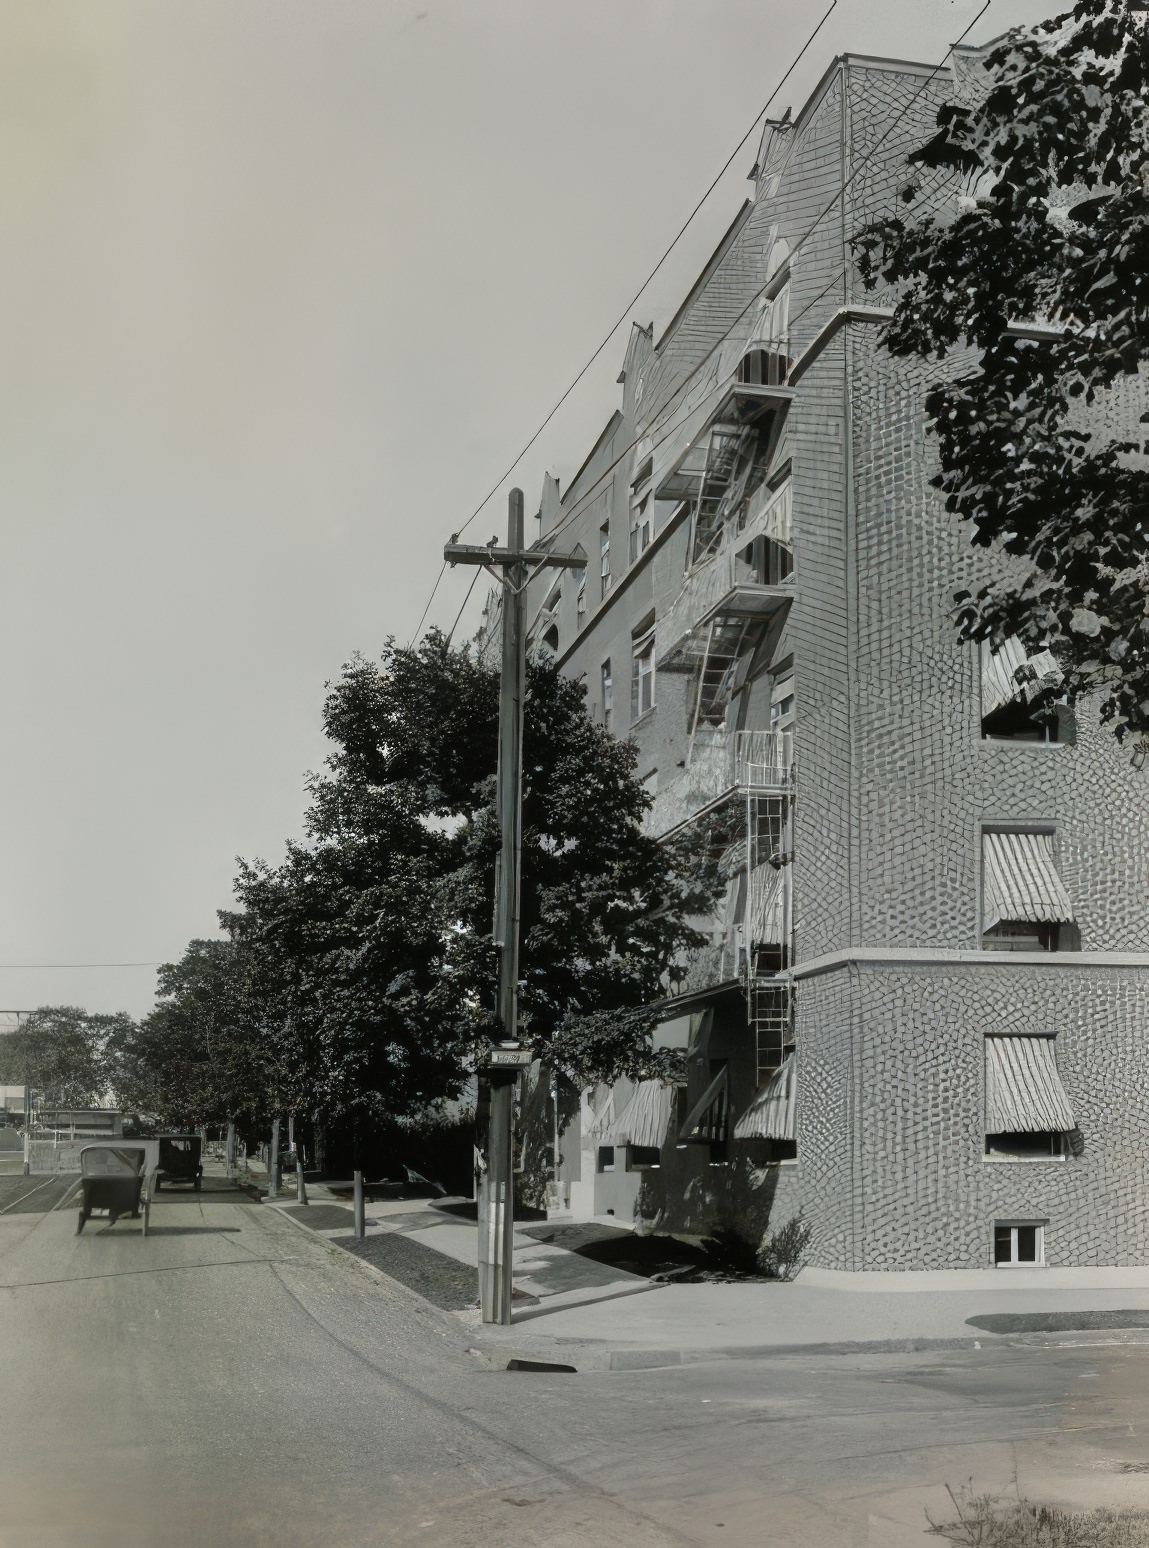 Corner Of West 192Nd Street And University Avenue, Showing An Apartment Building, 1915.